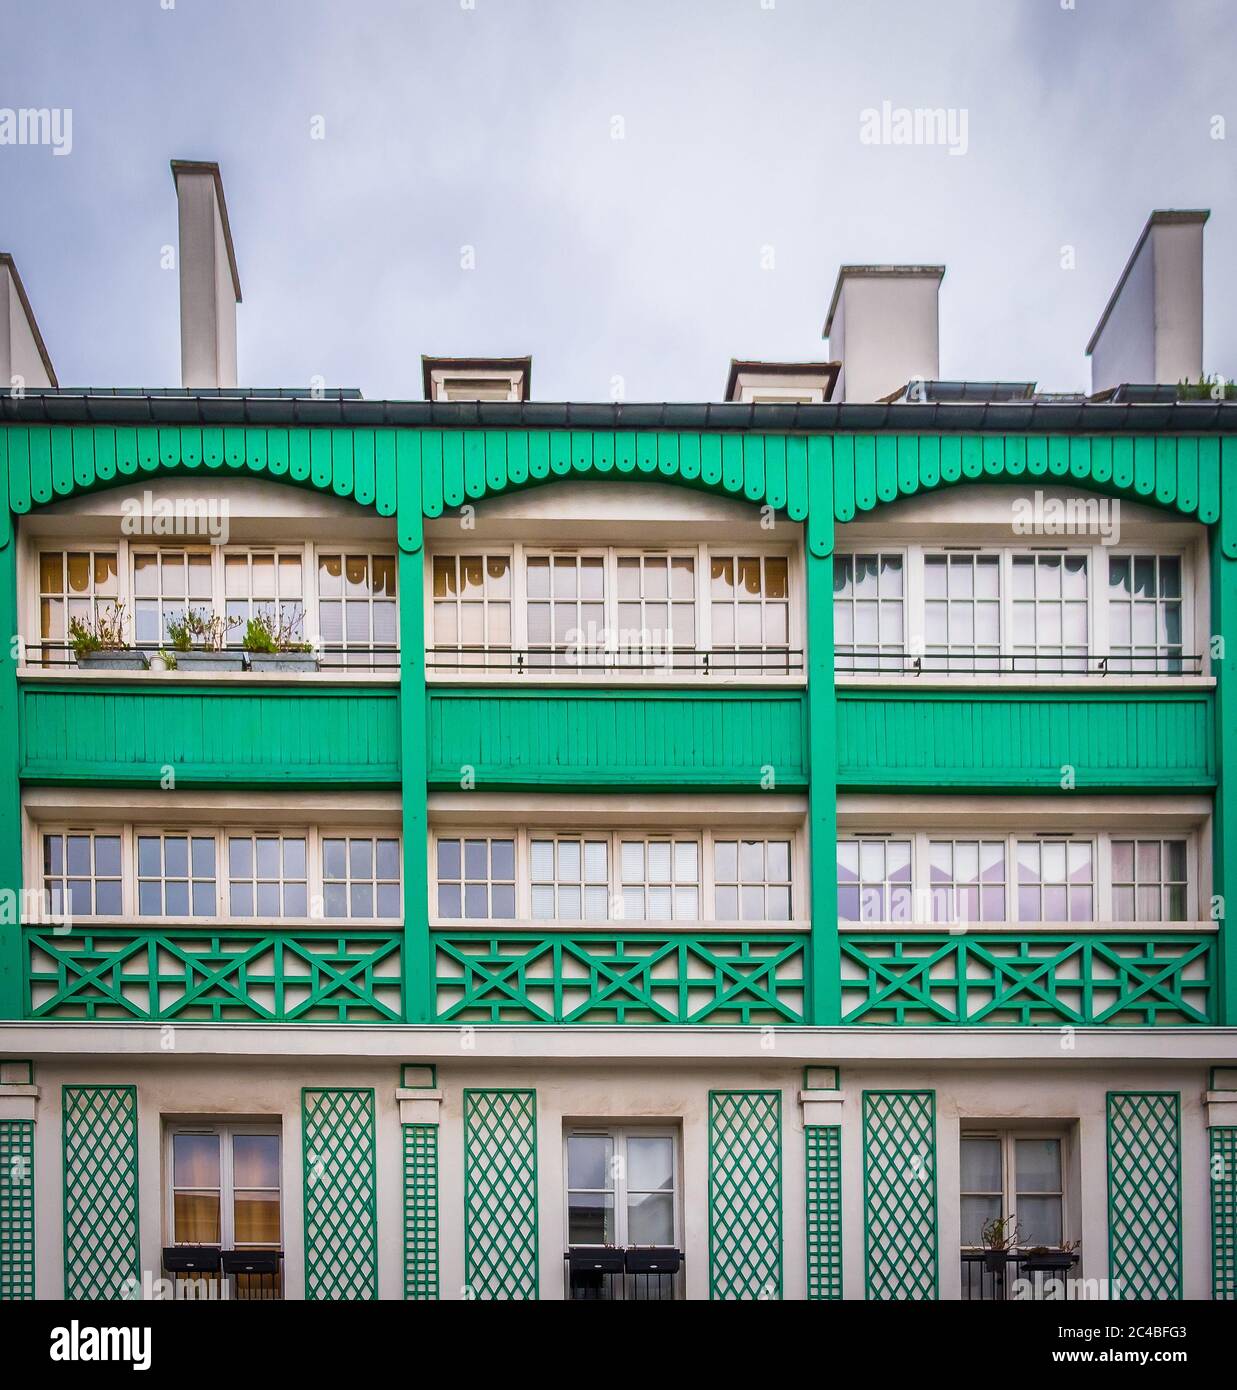 Paris, France, Feb 2020, view of the top floors of a green building in Lepic street in the heart of Montmartre district Stock Photo